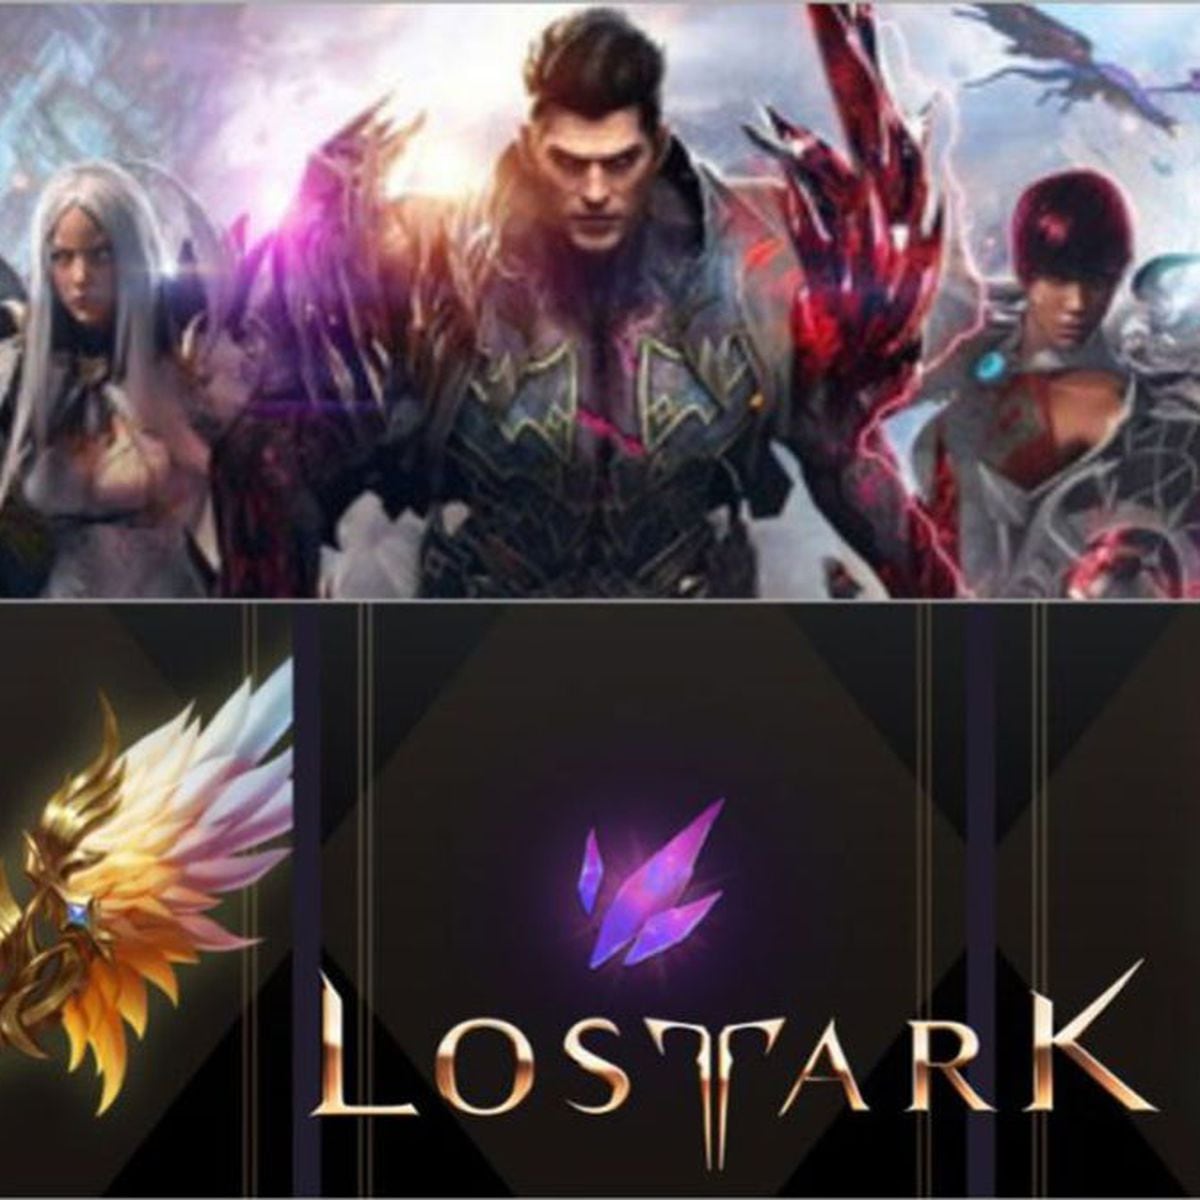 Adds Free Prime gaming Loot for Lost Ark 